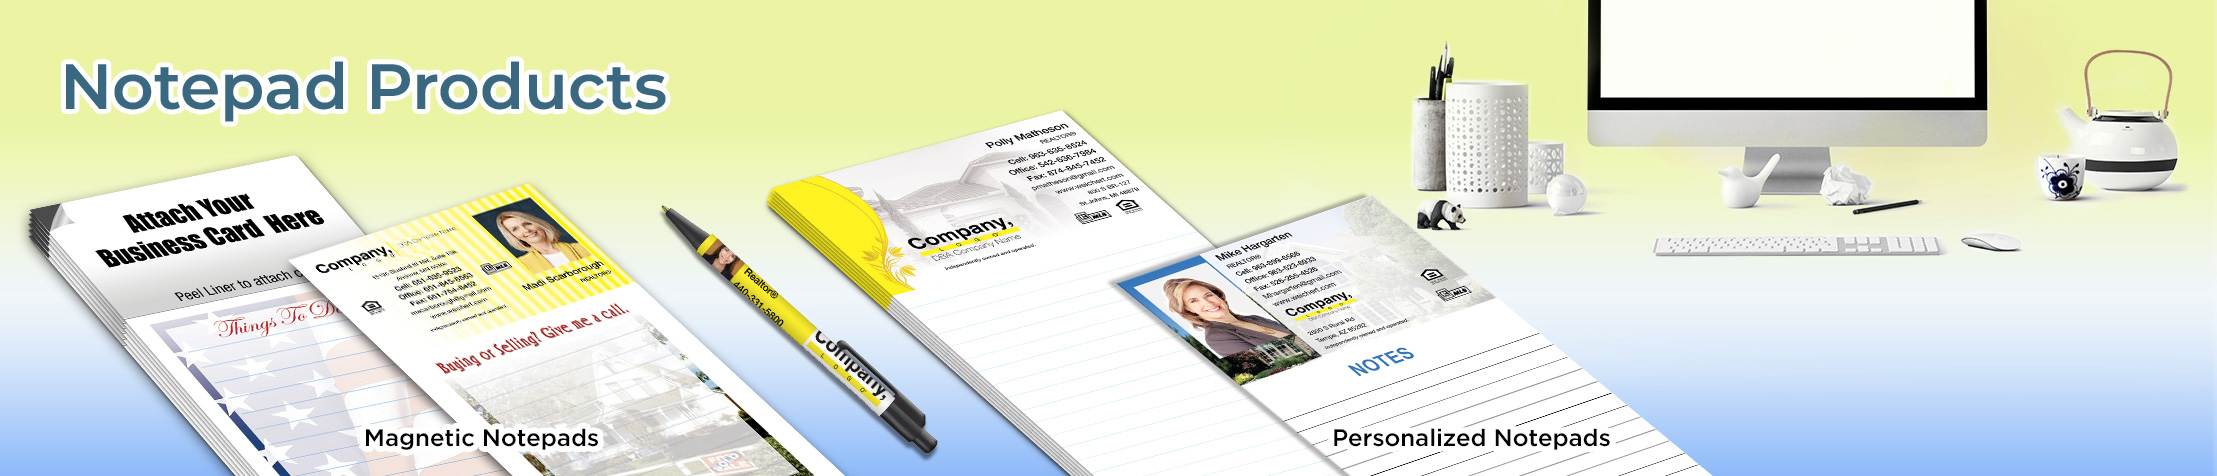 Weichert Real Estate Notepads - Weichert custom stationery and marketing tools, magnetic and personalized notepads | BestPrintBuy.com